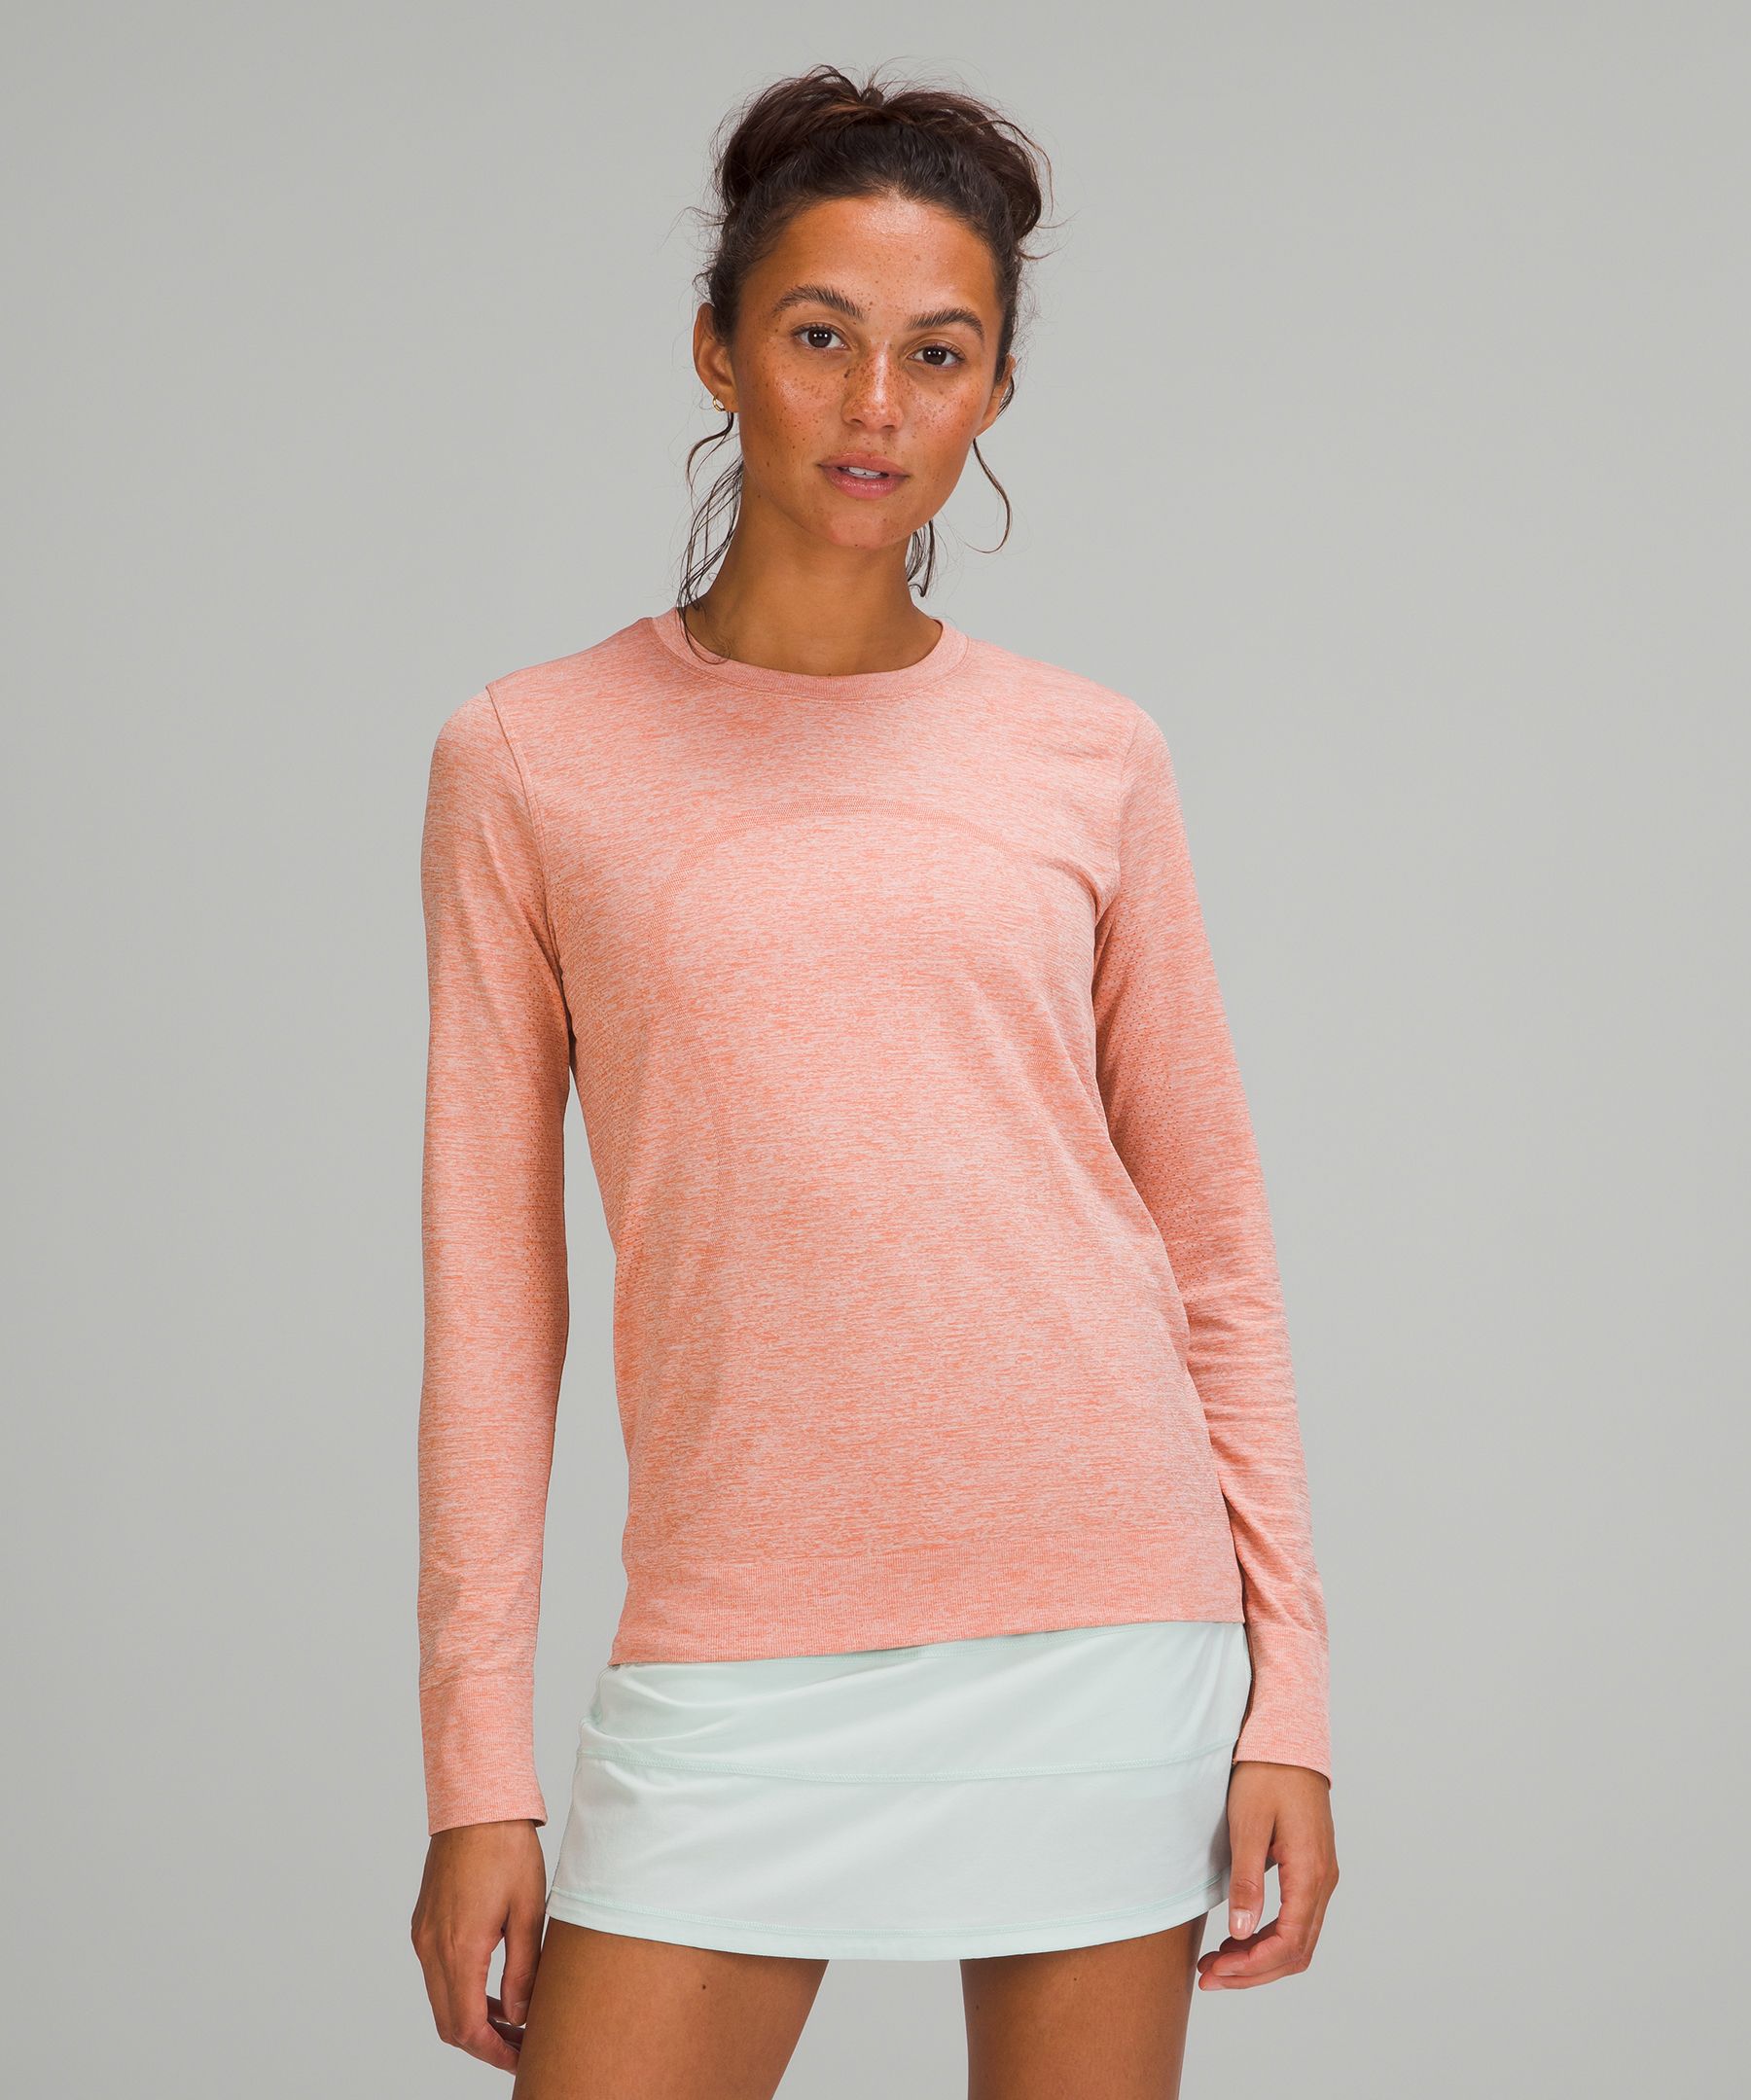 Lululemon Swiftly Relaxed Long Sleeve Shirt 2.0 In Pink Savannah/white